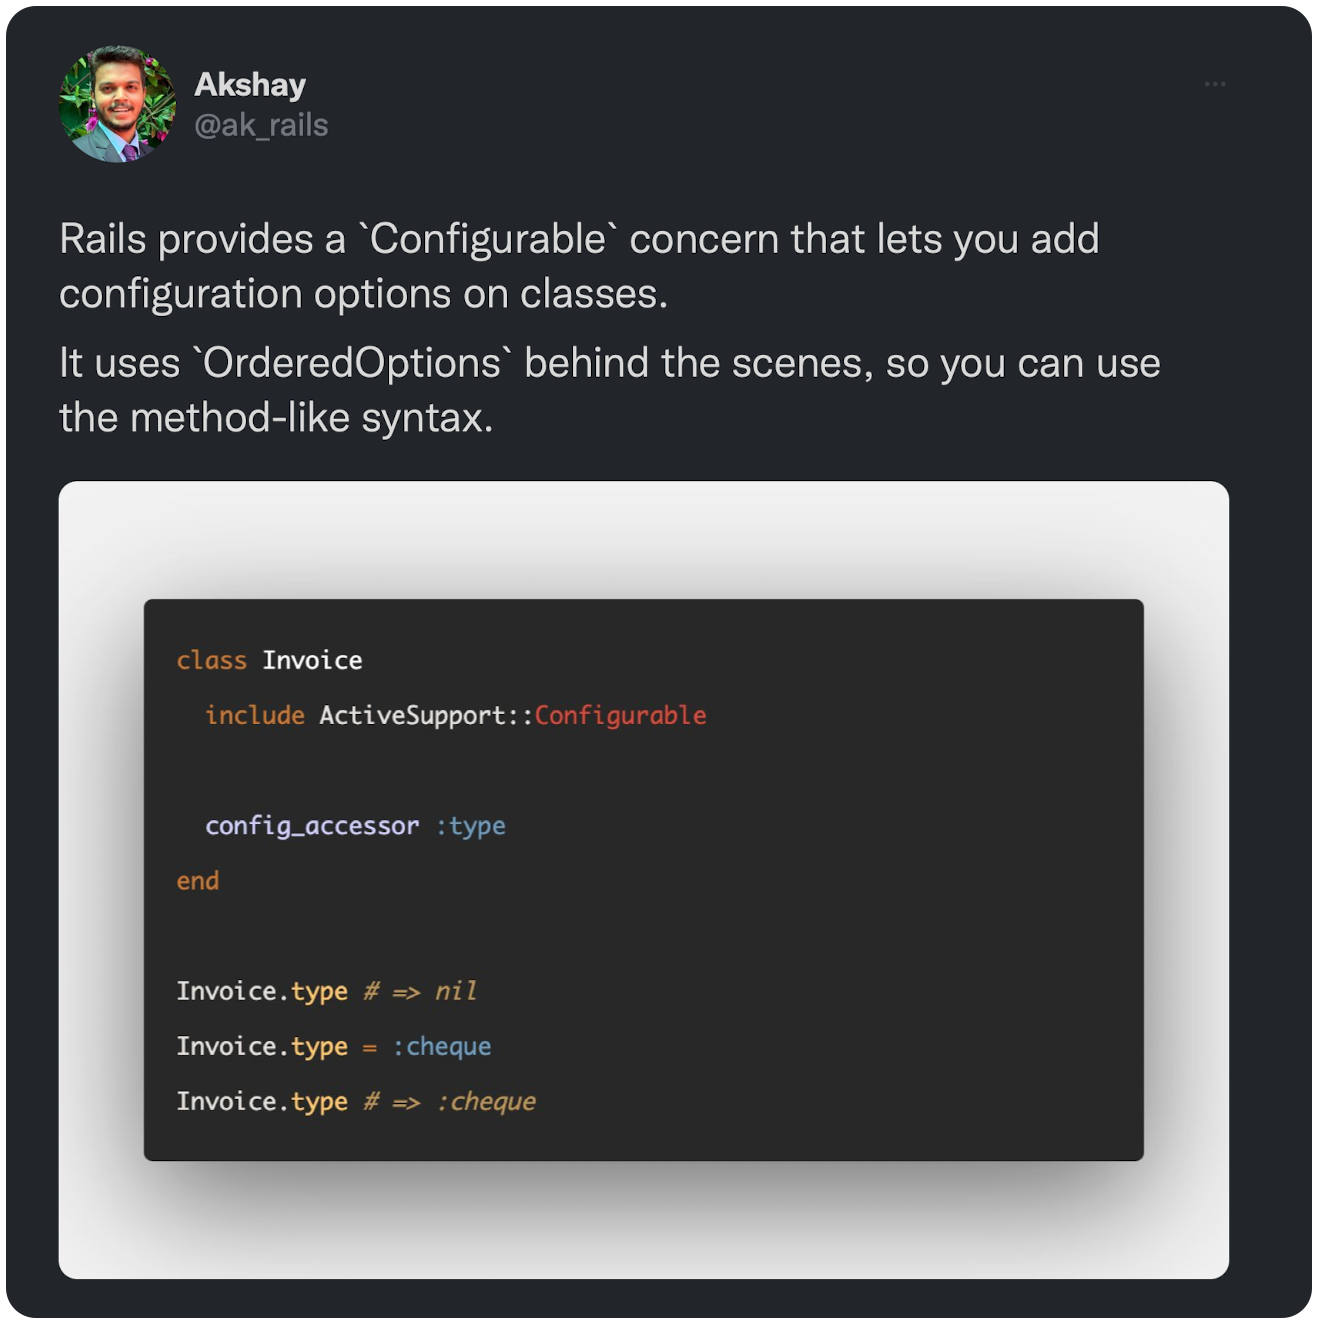 Rails provides a `Configurable` concern that lets you add configuration options on classes. It uses `OrderedOptions` behind the scenes, so you can use the method-like syntax.